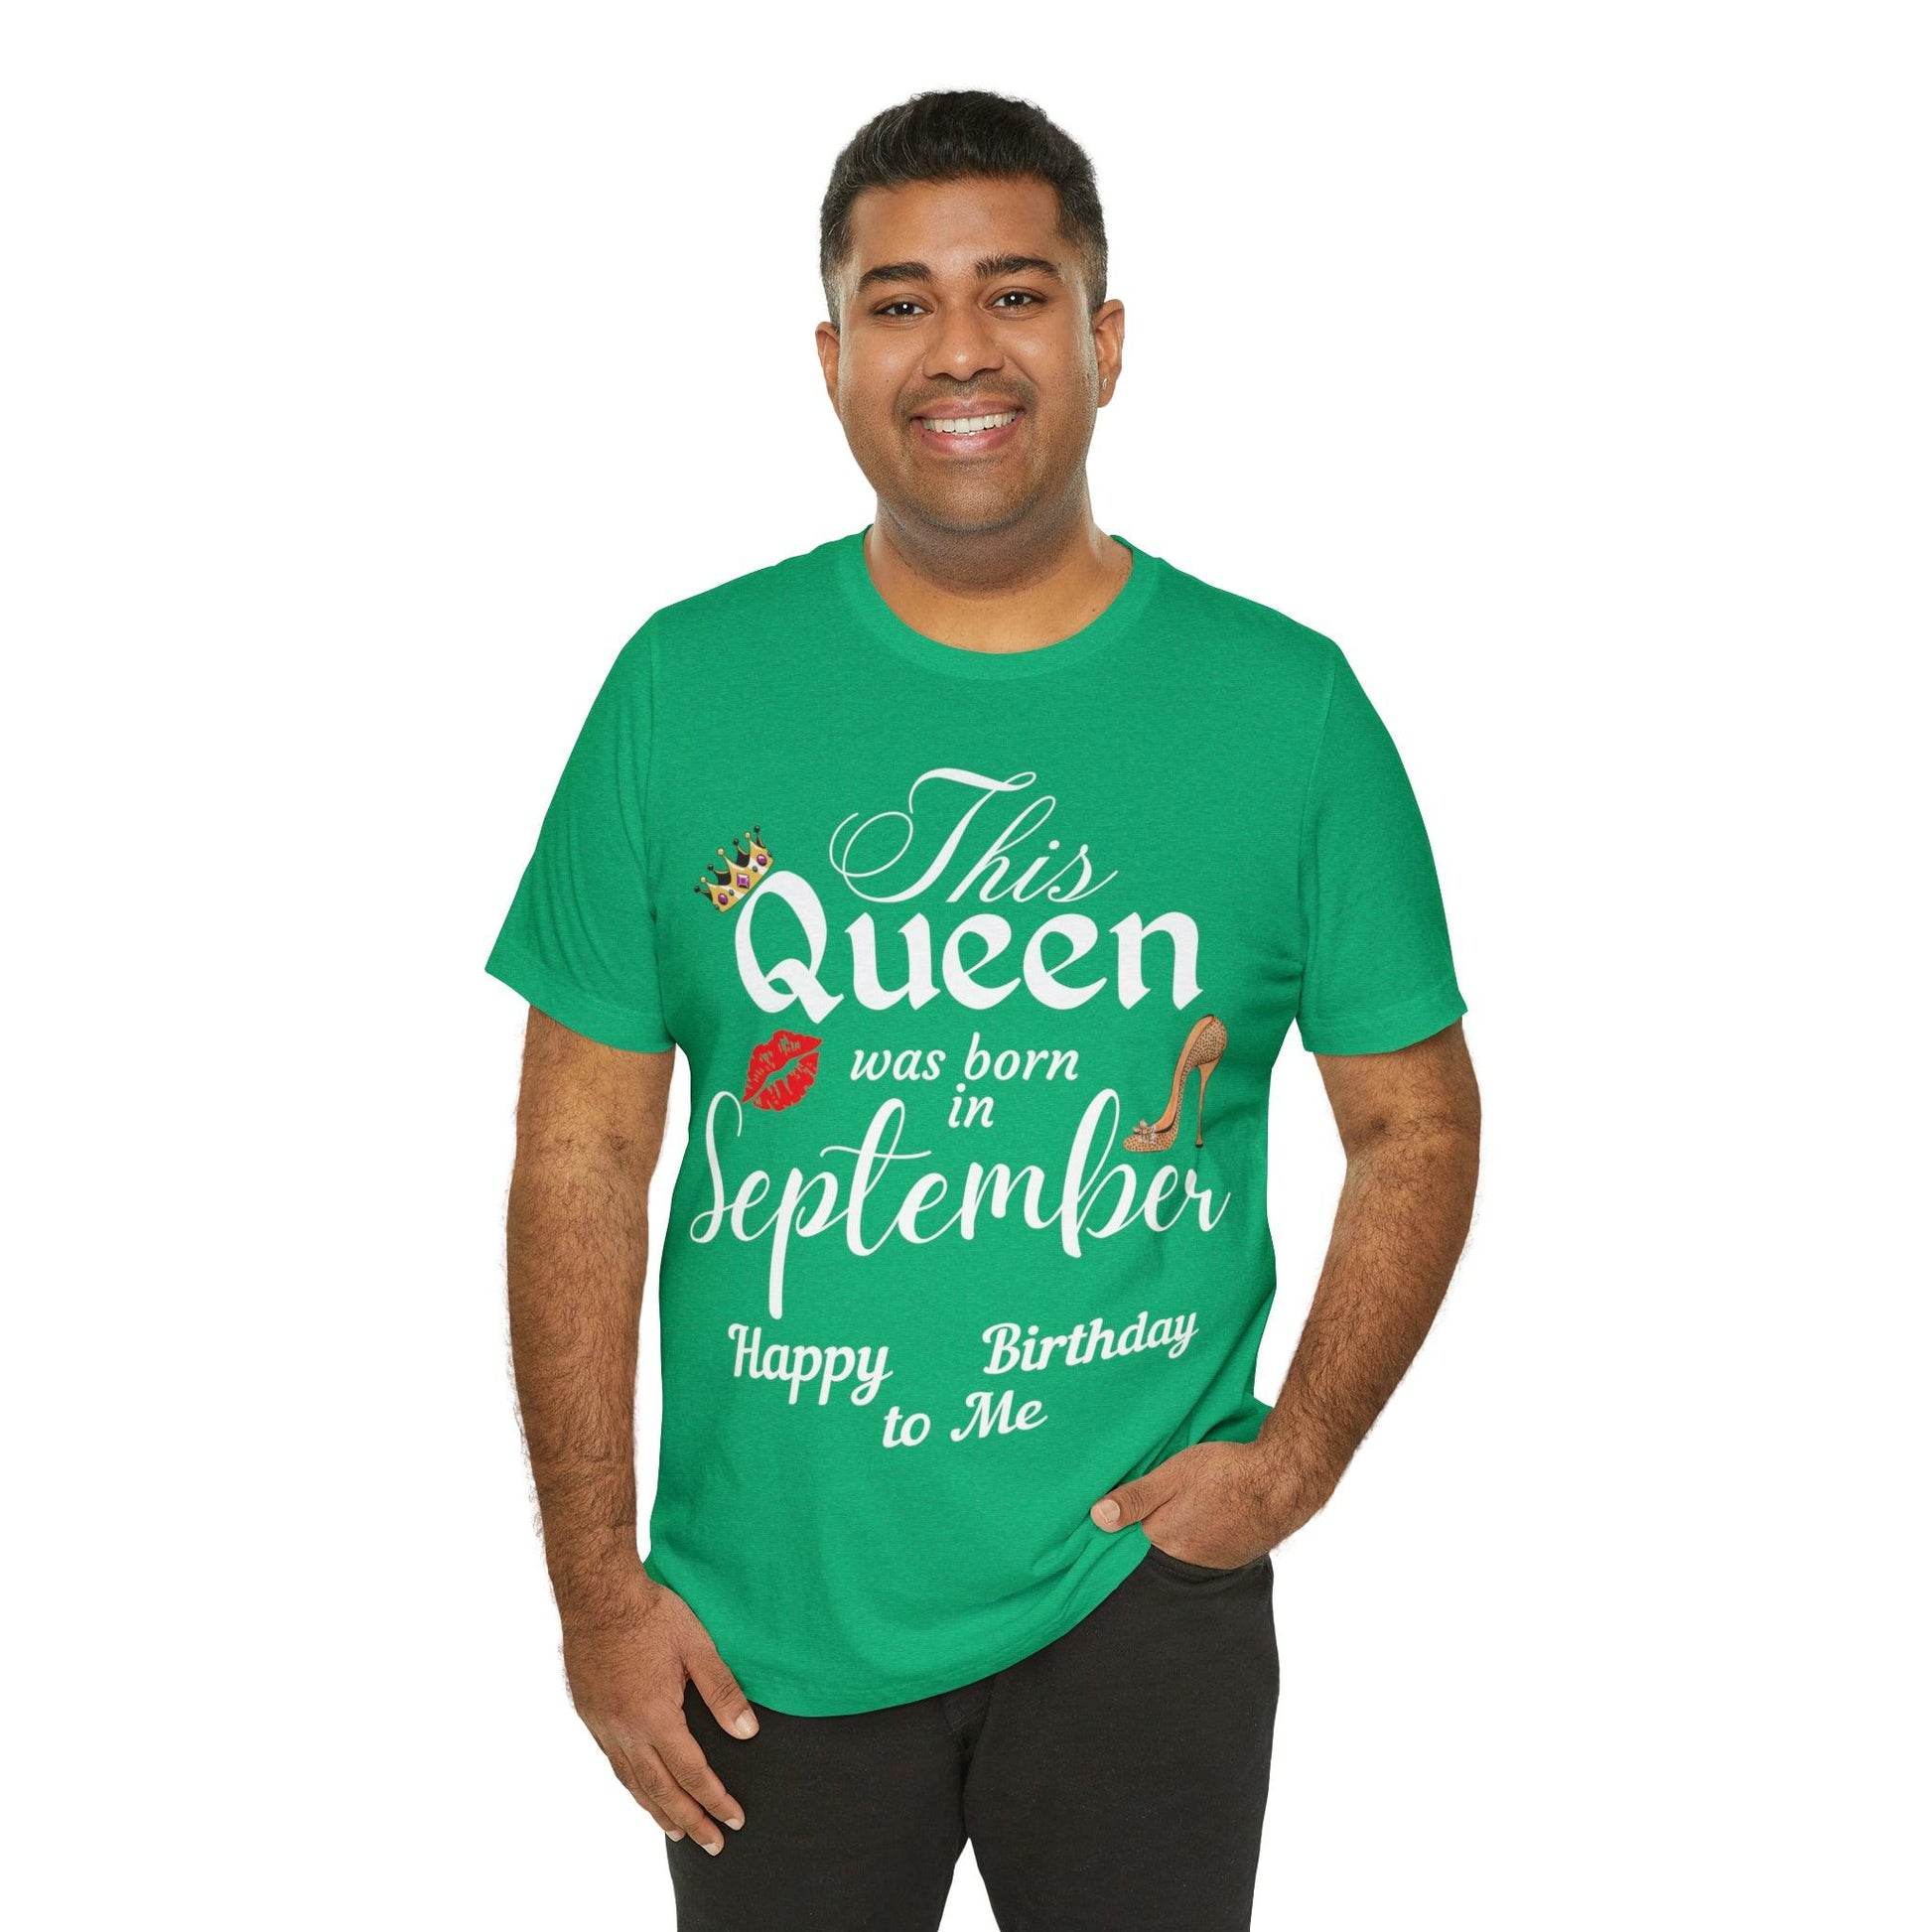 Birthday Queen Shirt, Gift for Birthday, This Queen was born in September Shirt, Funny Queen Shirt, Funny Birthday Shirt, Birthday Gift - Giftsmojo